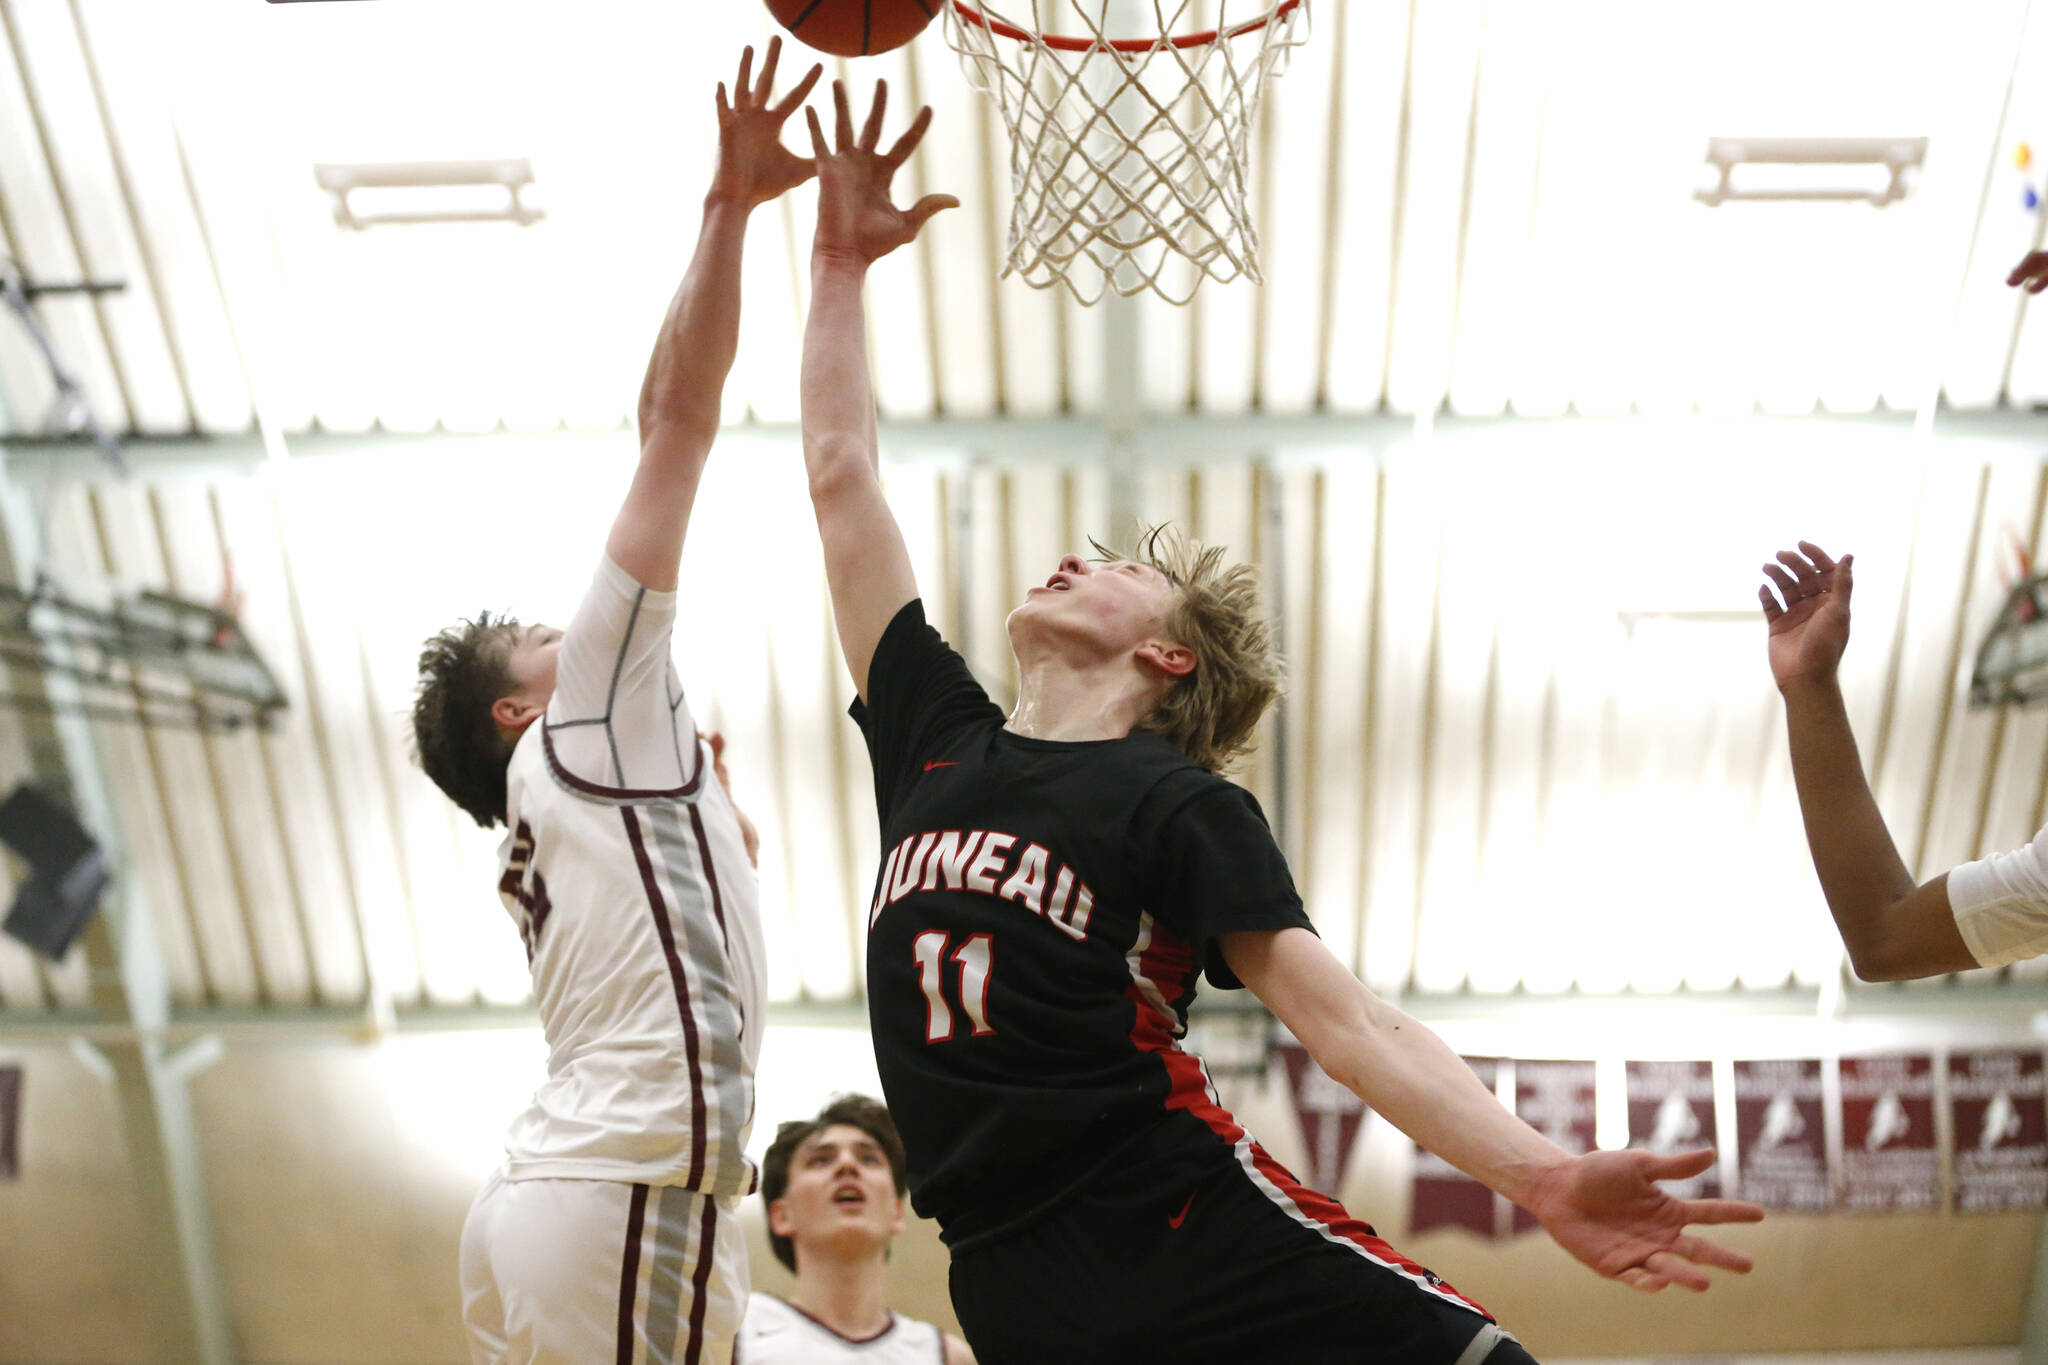 Kayhi’s Archie Dundas (22) attempts to block Juneau’s Sean Oliver (11) during Juneau’s 71-52 loss to Kayhi on Friday at the Clarke Cochrane Gymnasium. (Christopher Mullen / Ketchikan Daily News)